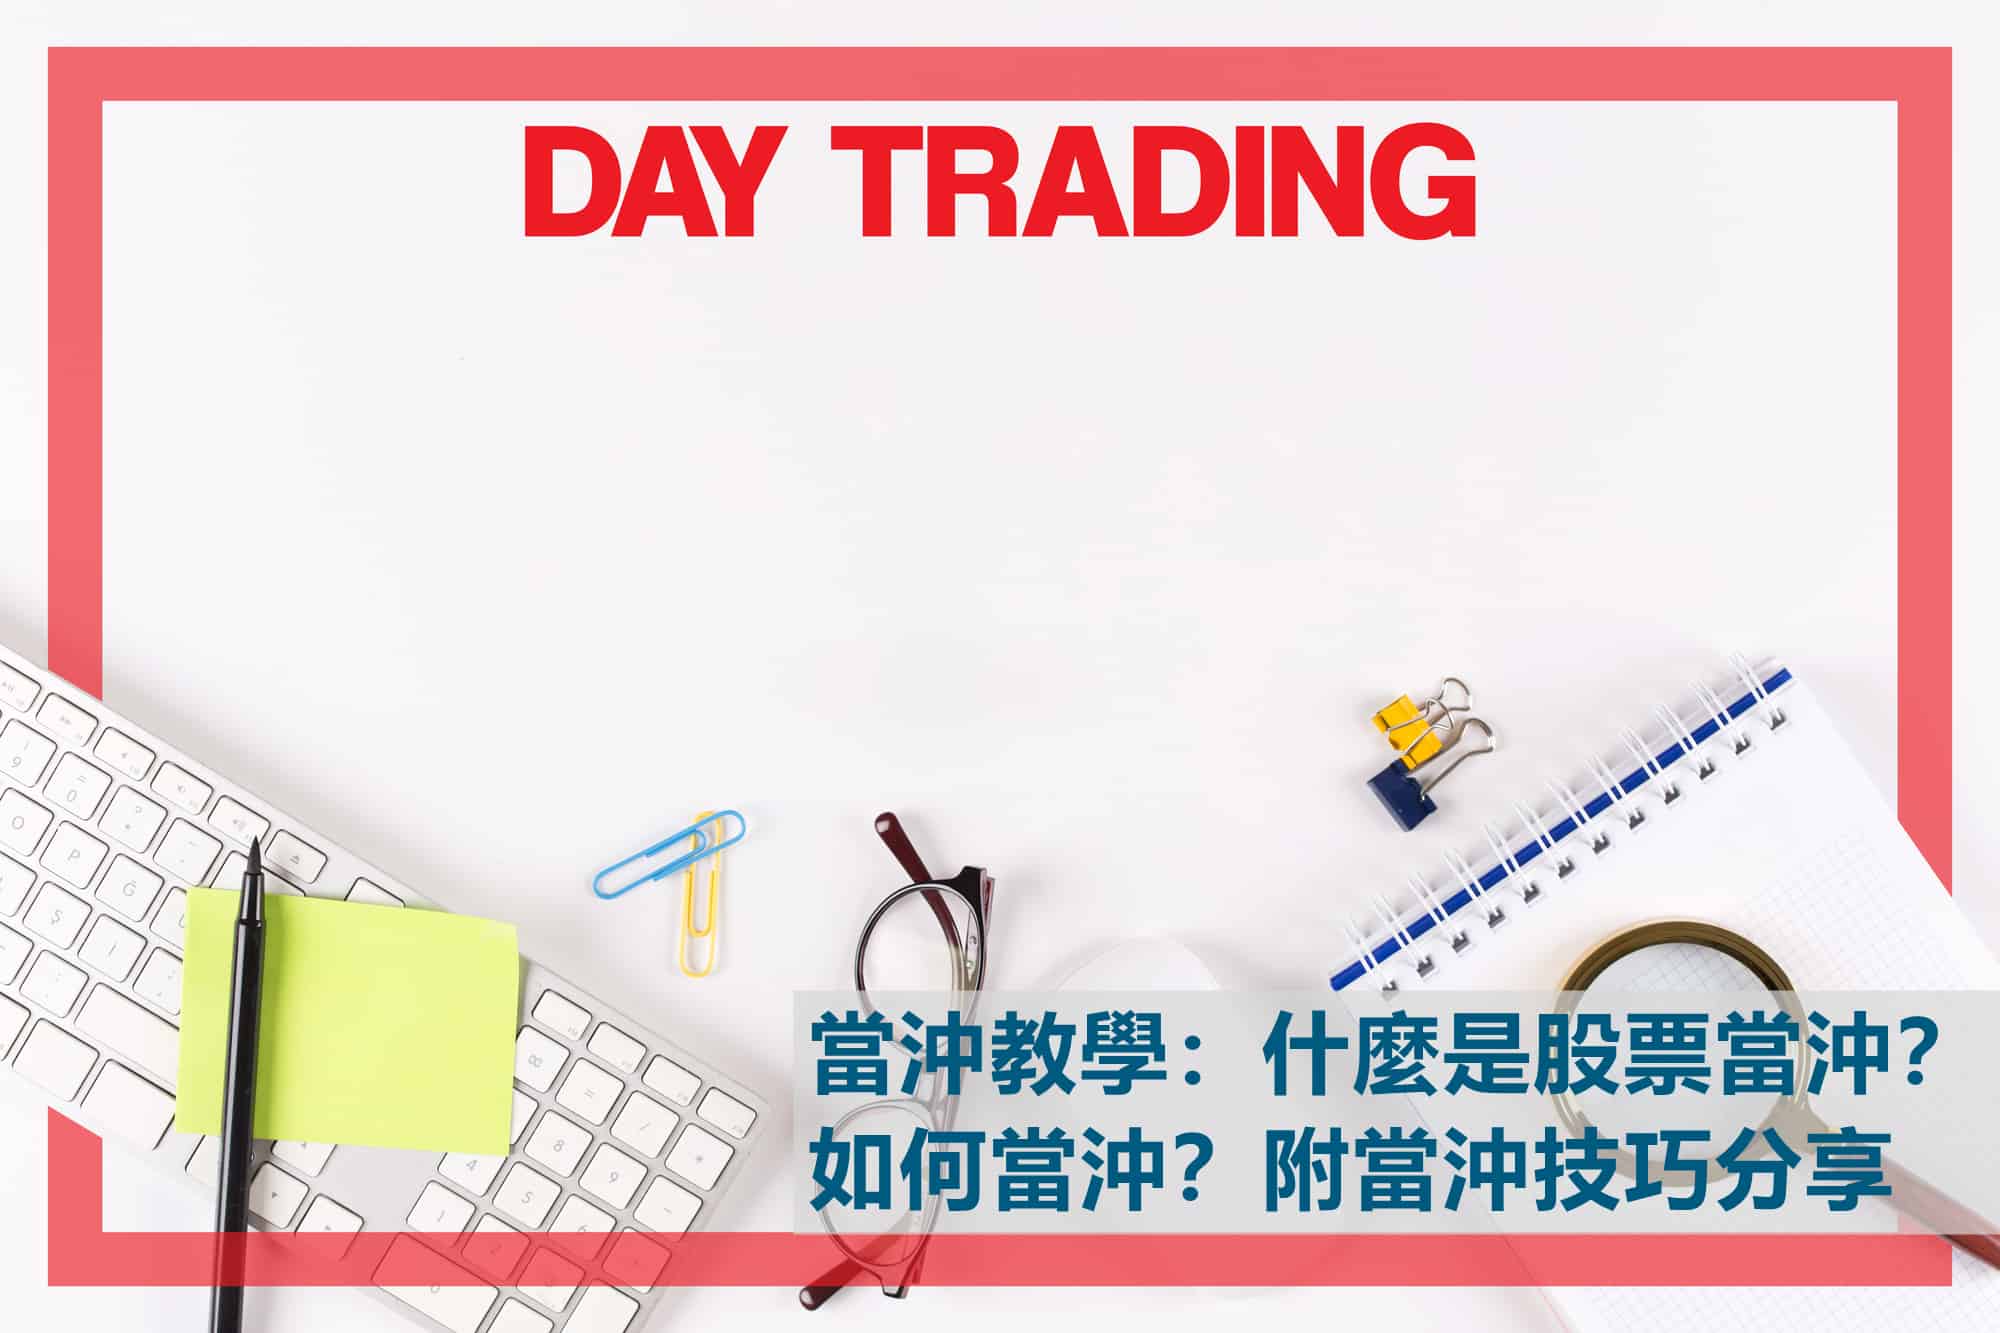 What is daying trading